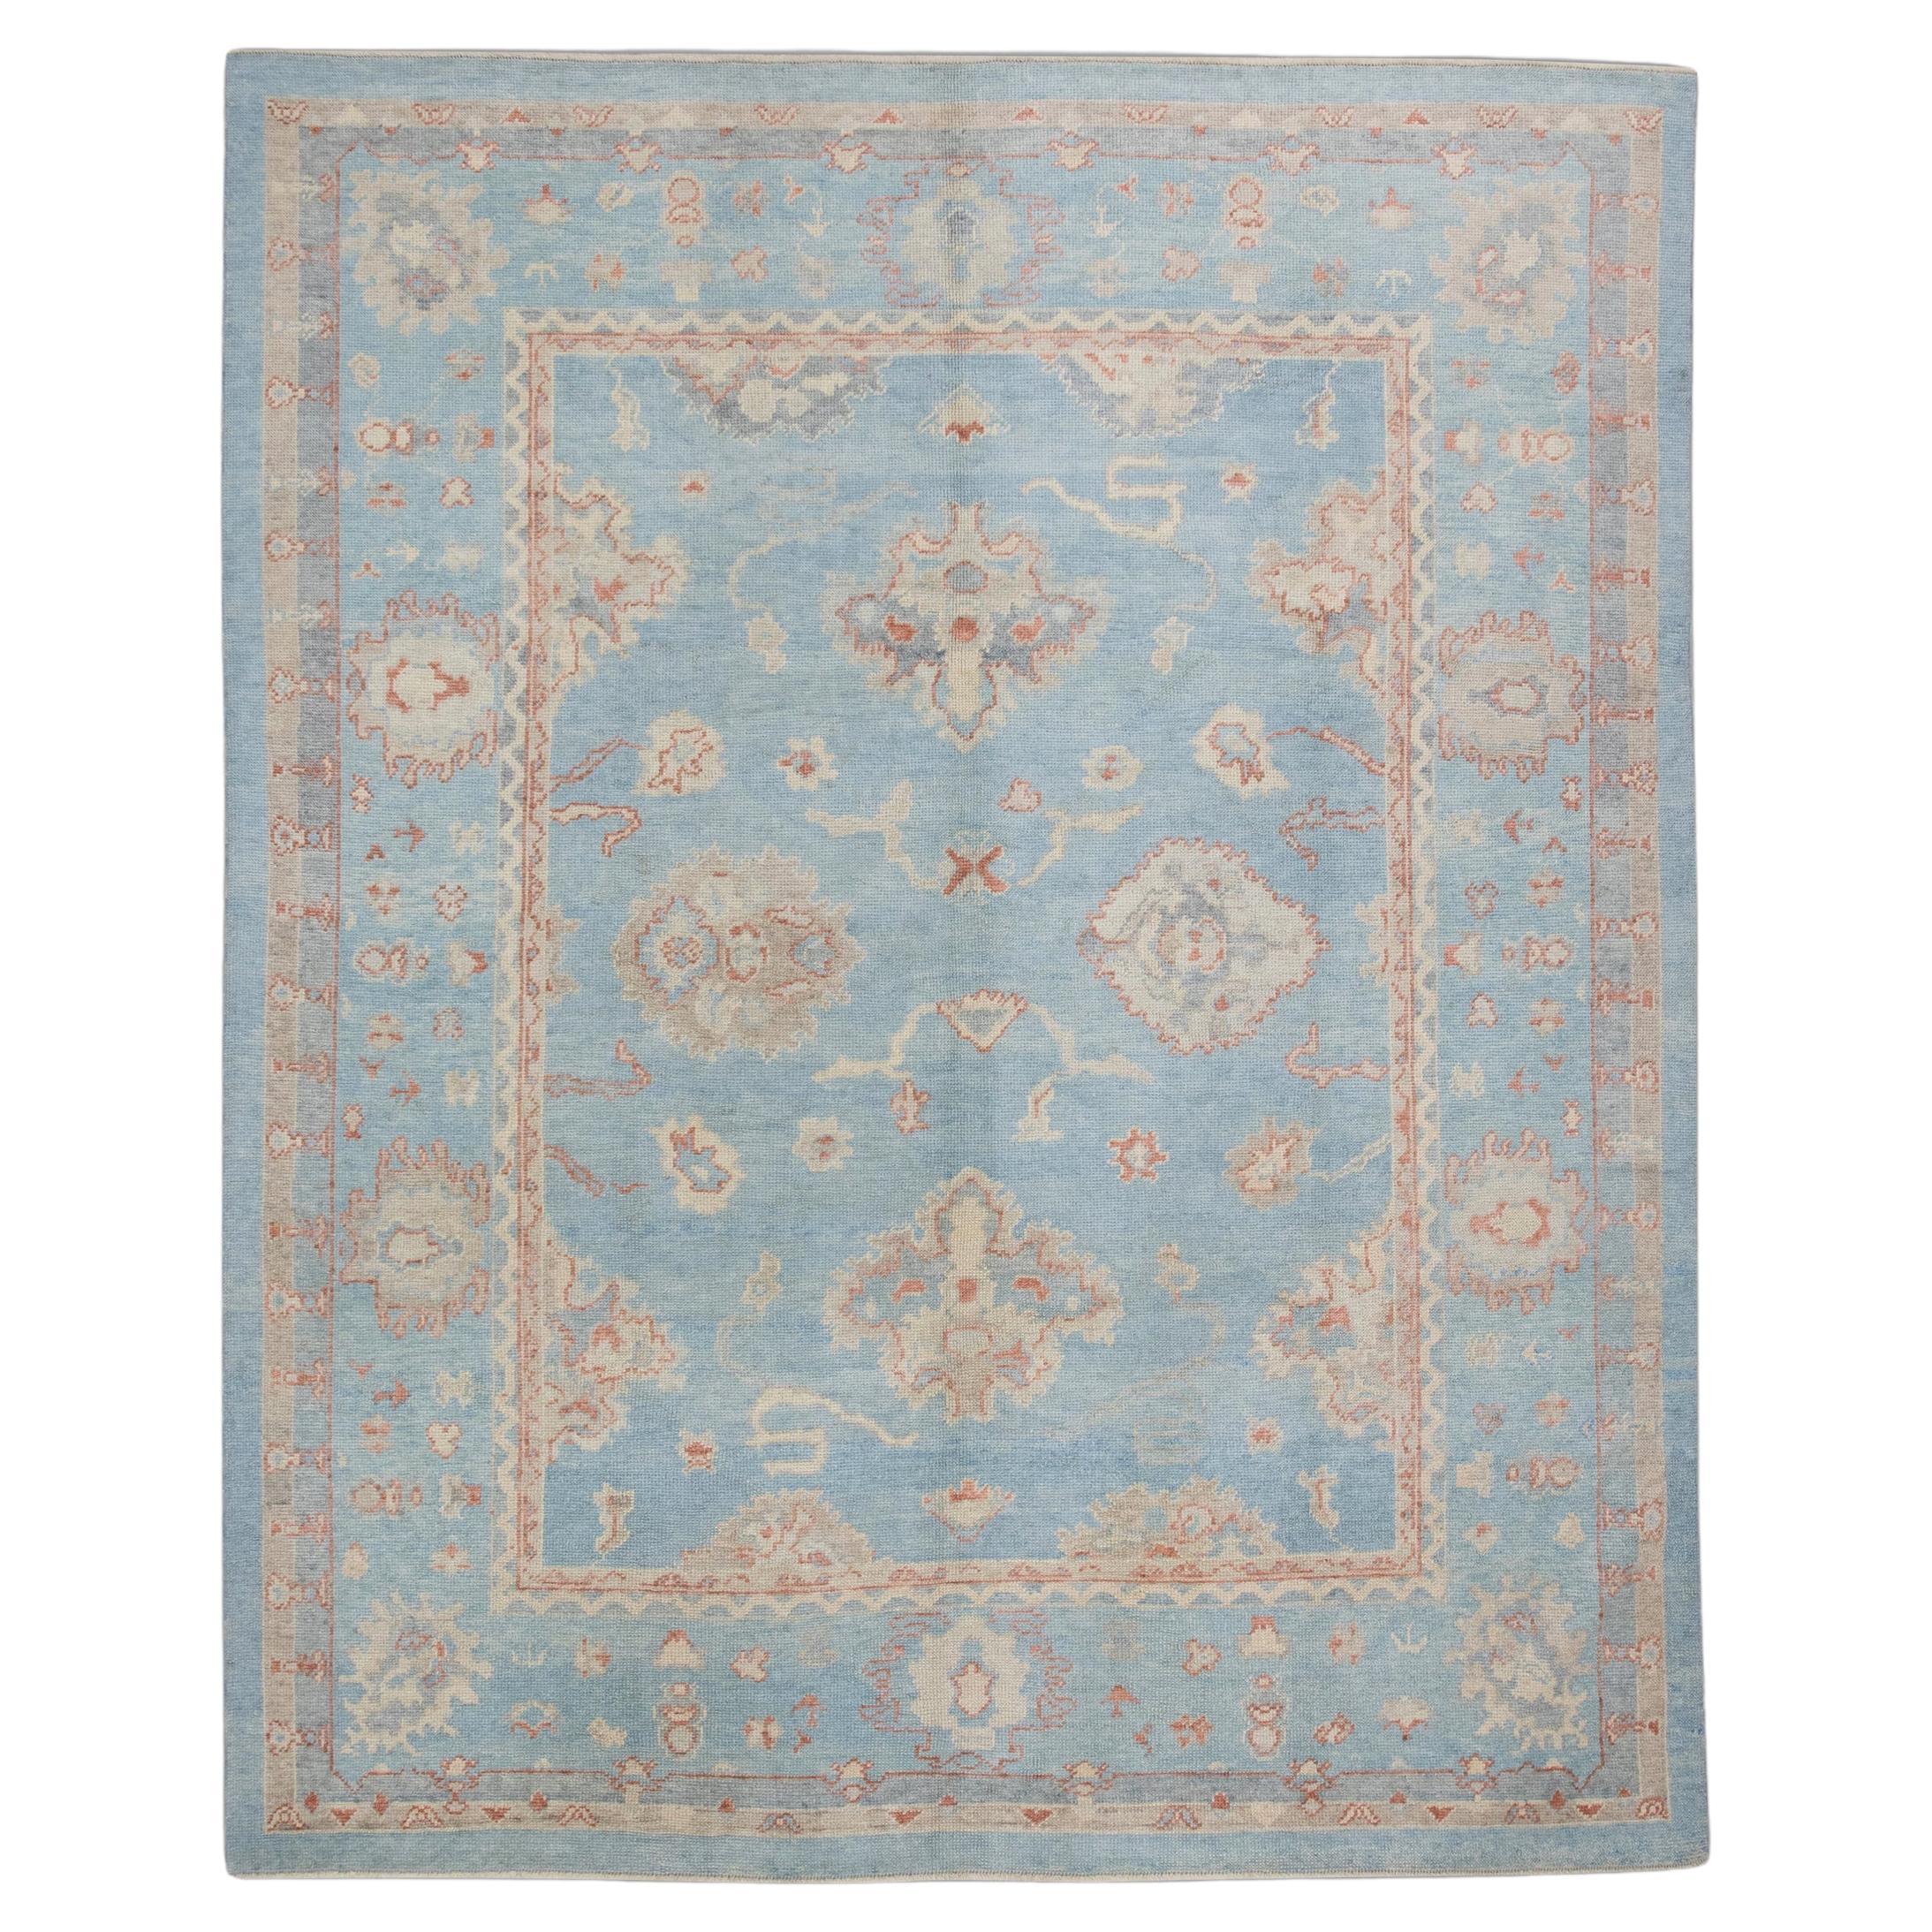 Blue Handwoven Wool Turkish Oushak Rug in Red Floral Pattern 8'4" x 10'2"